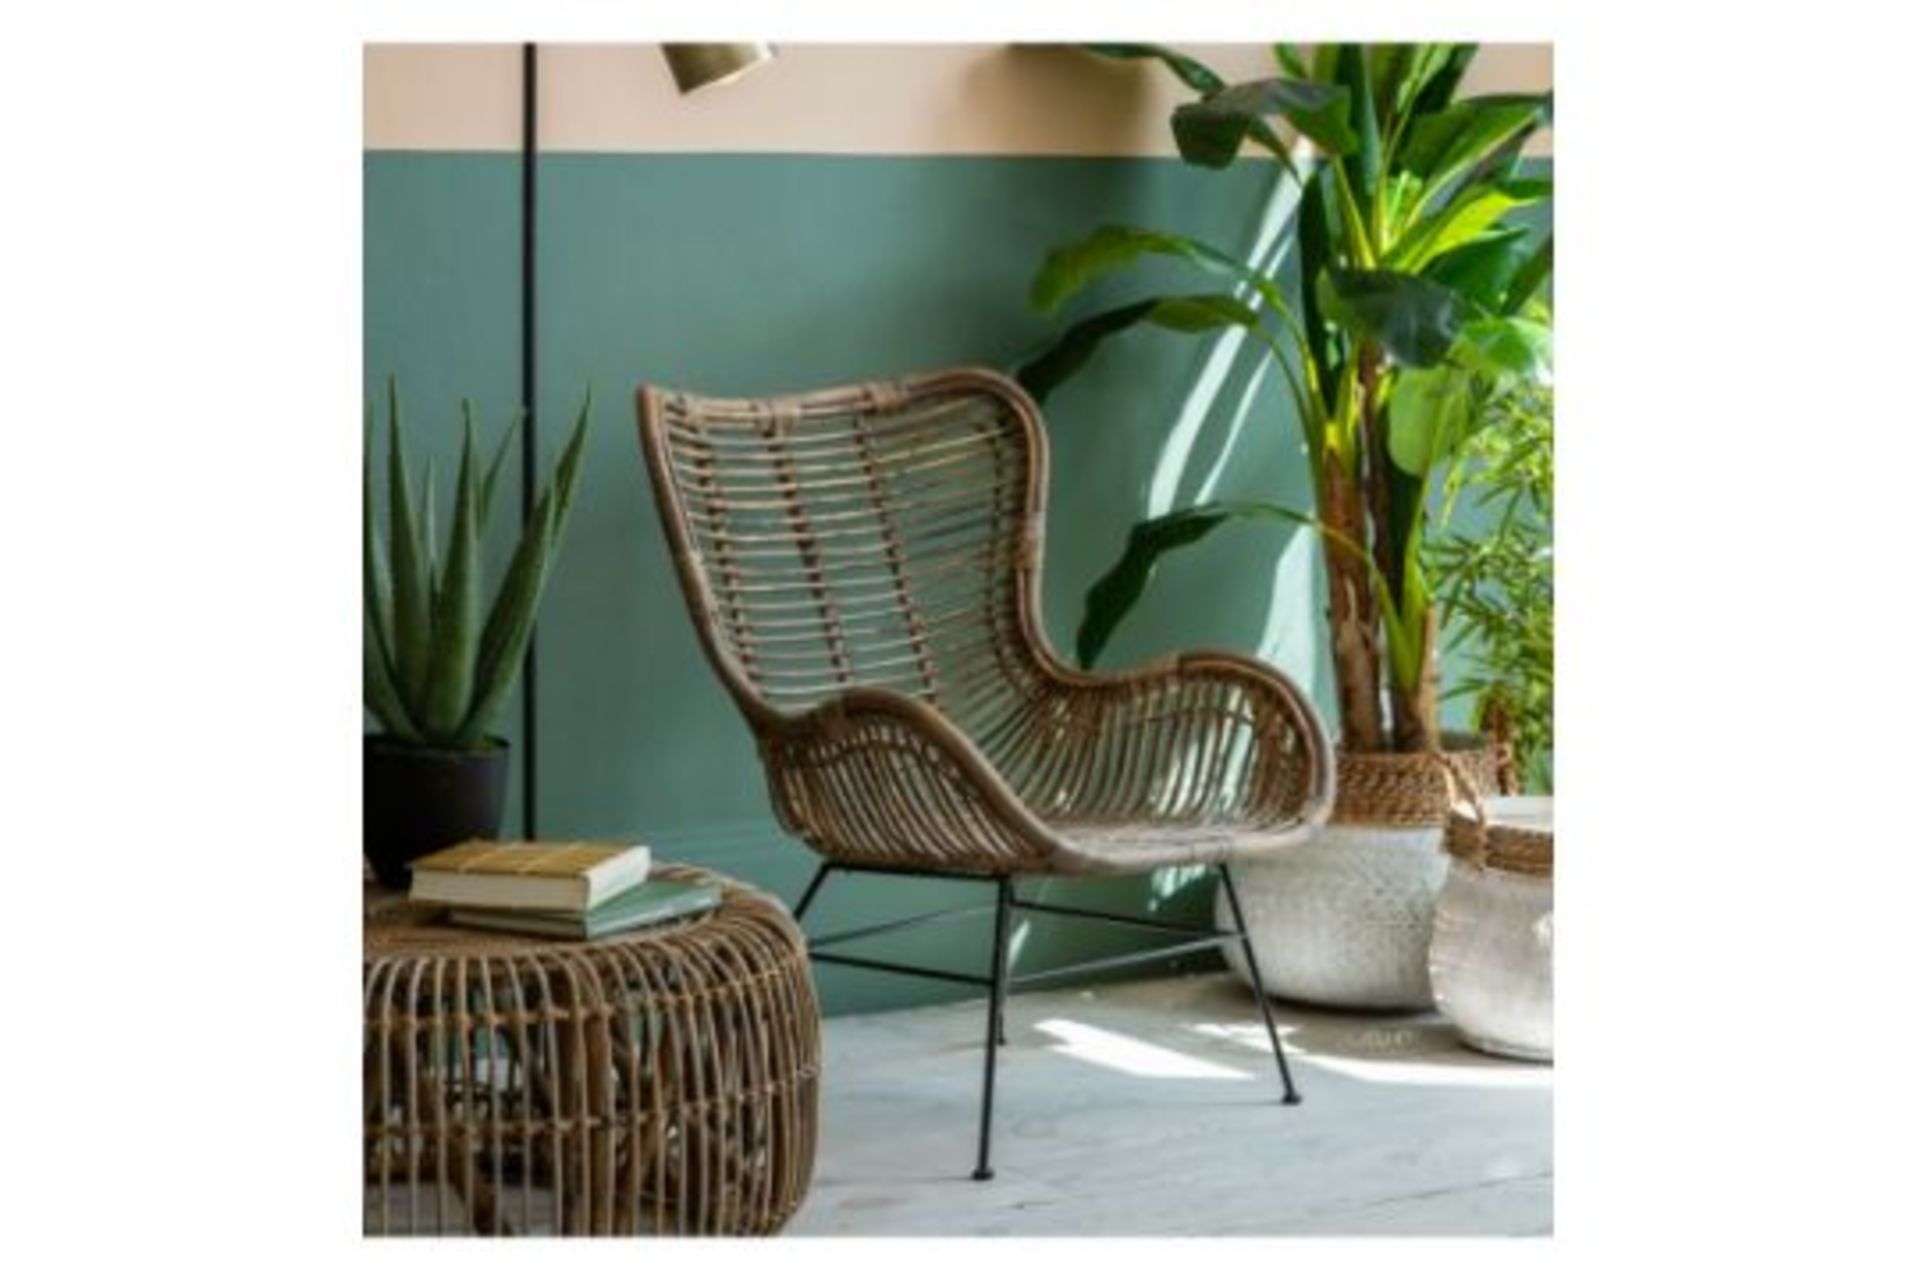 Kenda Lounger The Kenda Lounger From Gallery Direct Is A Stunning Lounge Chair It Is A Hand Woven